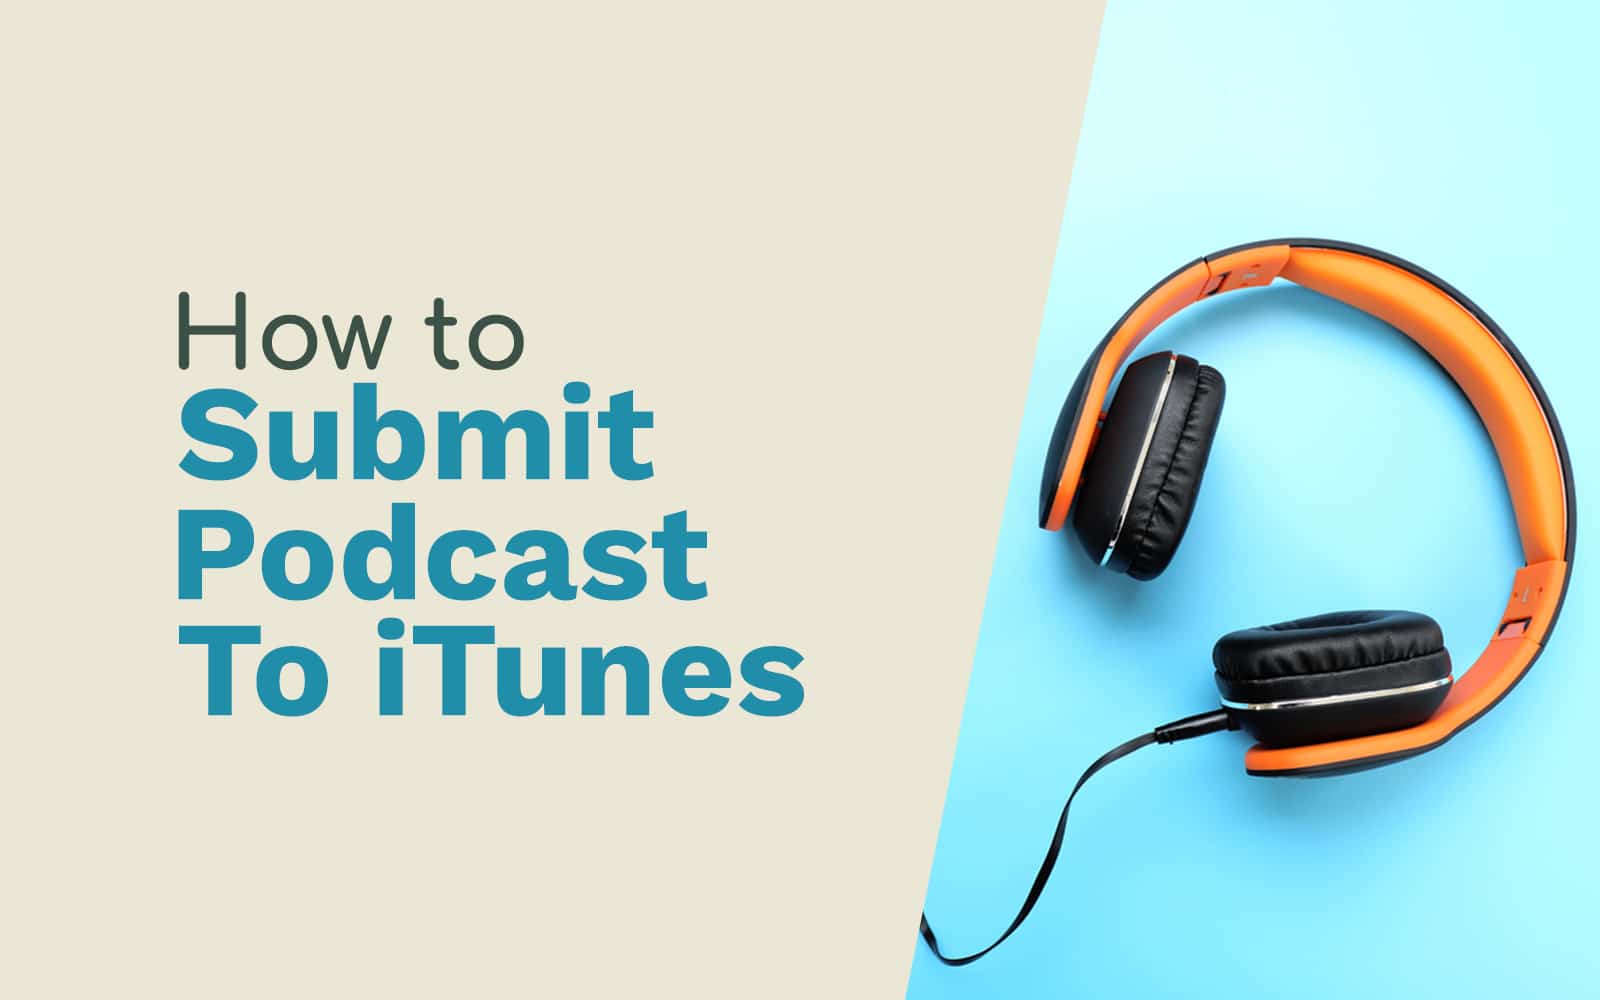 How To Submit Podcast To iTunes General submit podcast to itunes Music Radio Creative